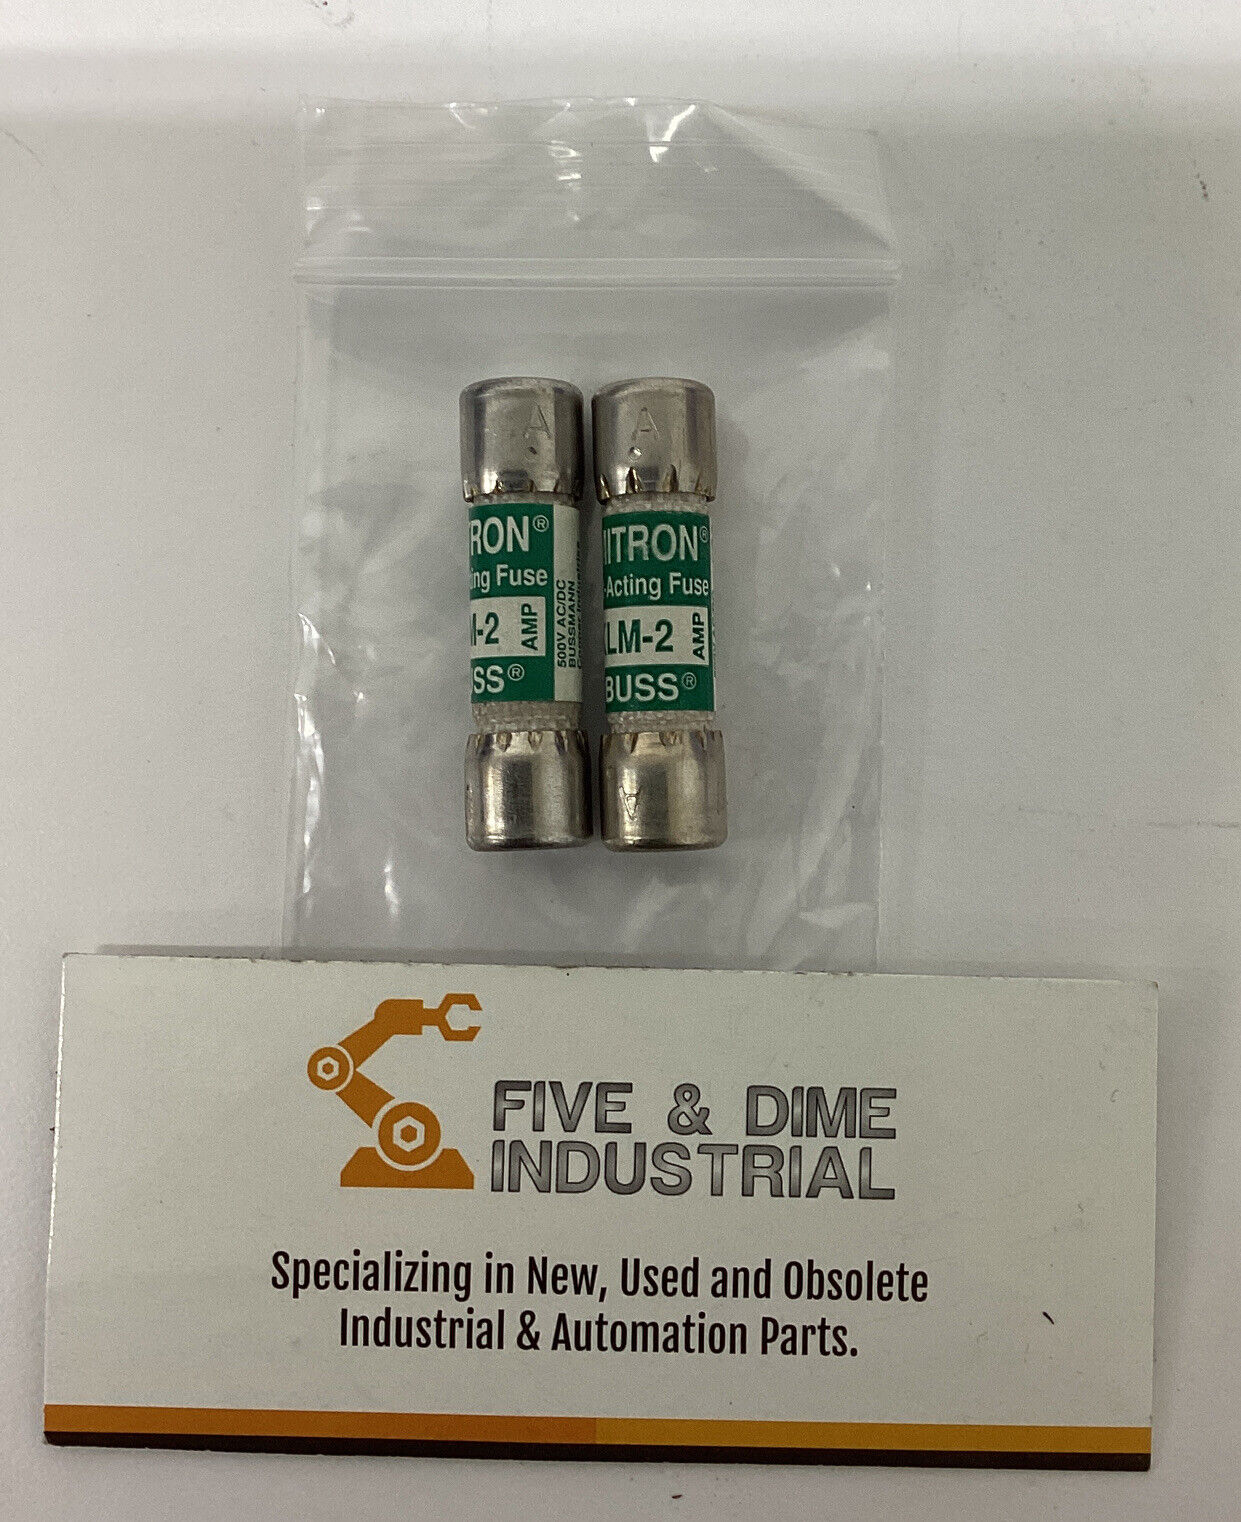 Bussmann Limitron KLM-2 Lot of 2 Fast Acting 2 Amp Fuses (YE245)